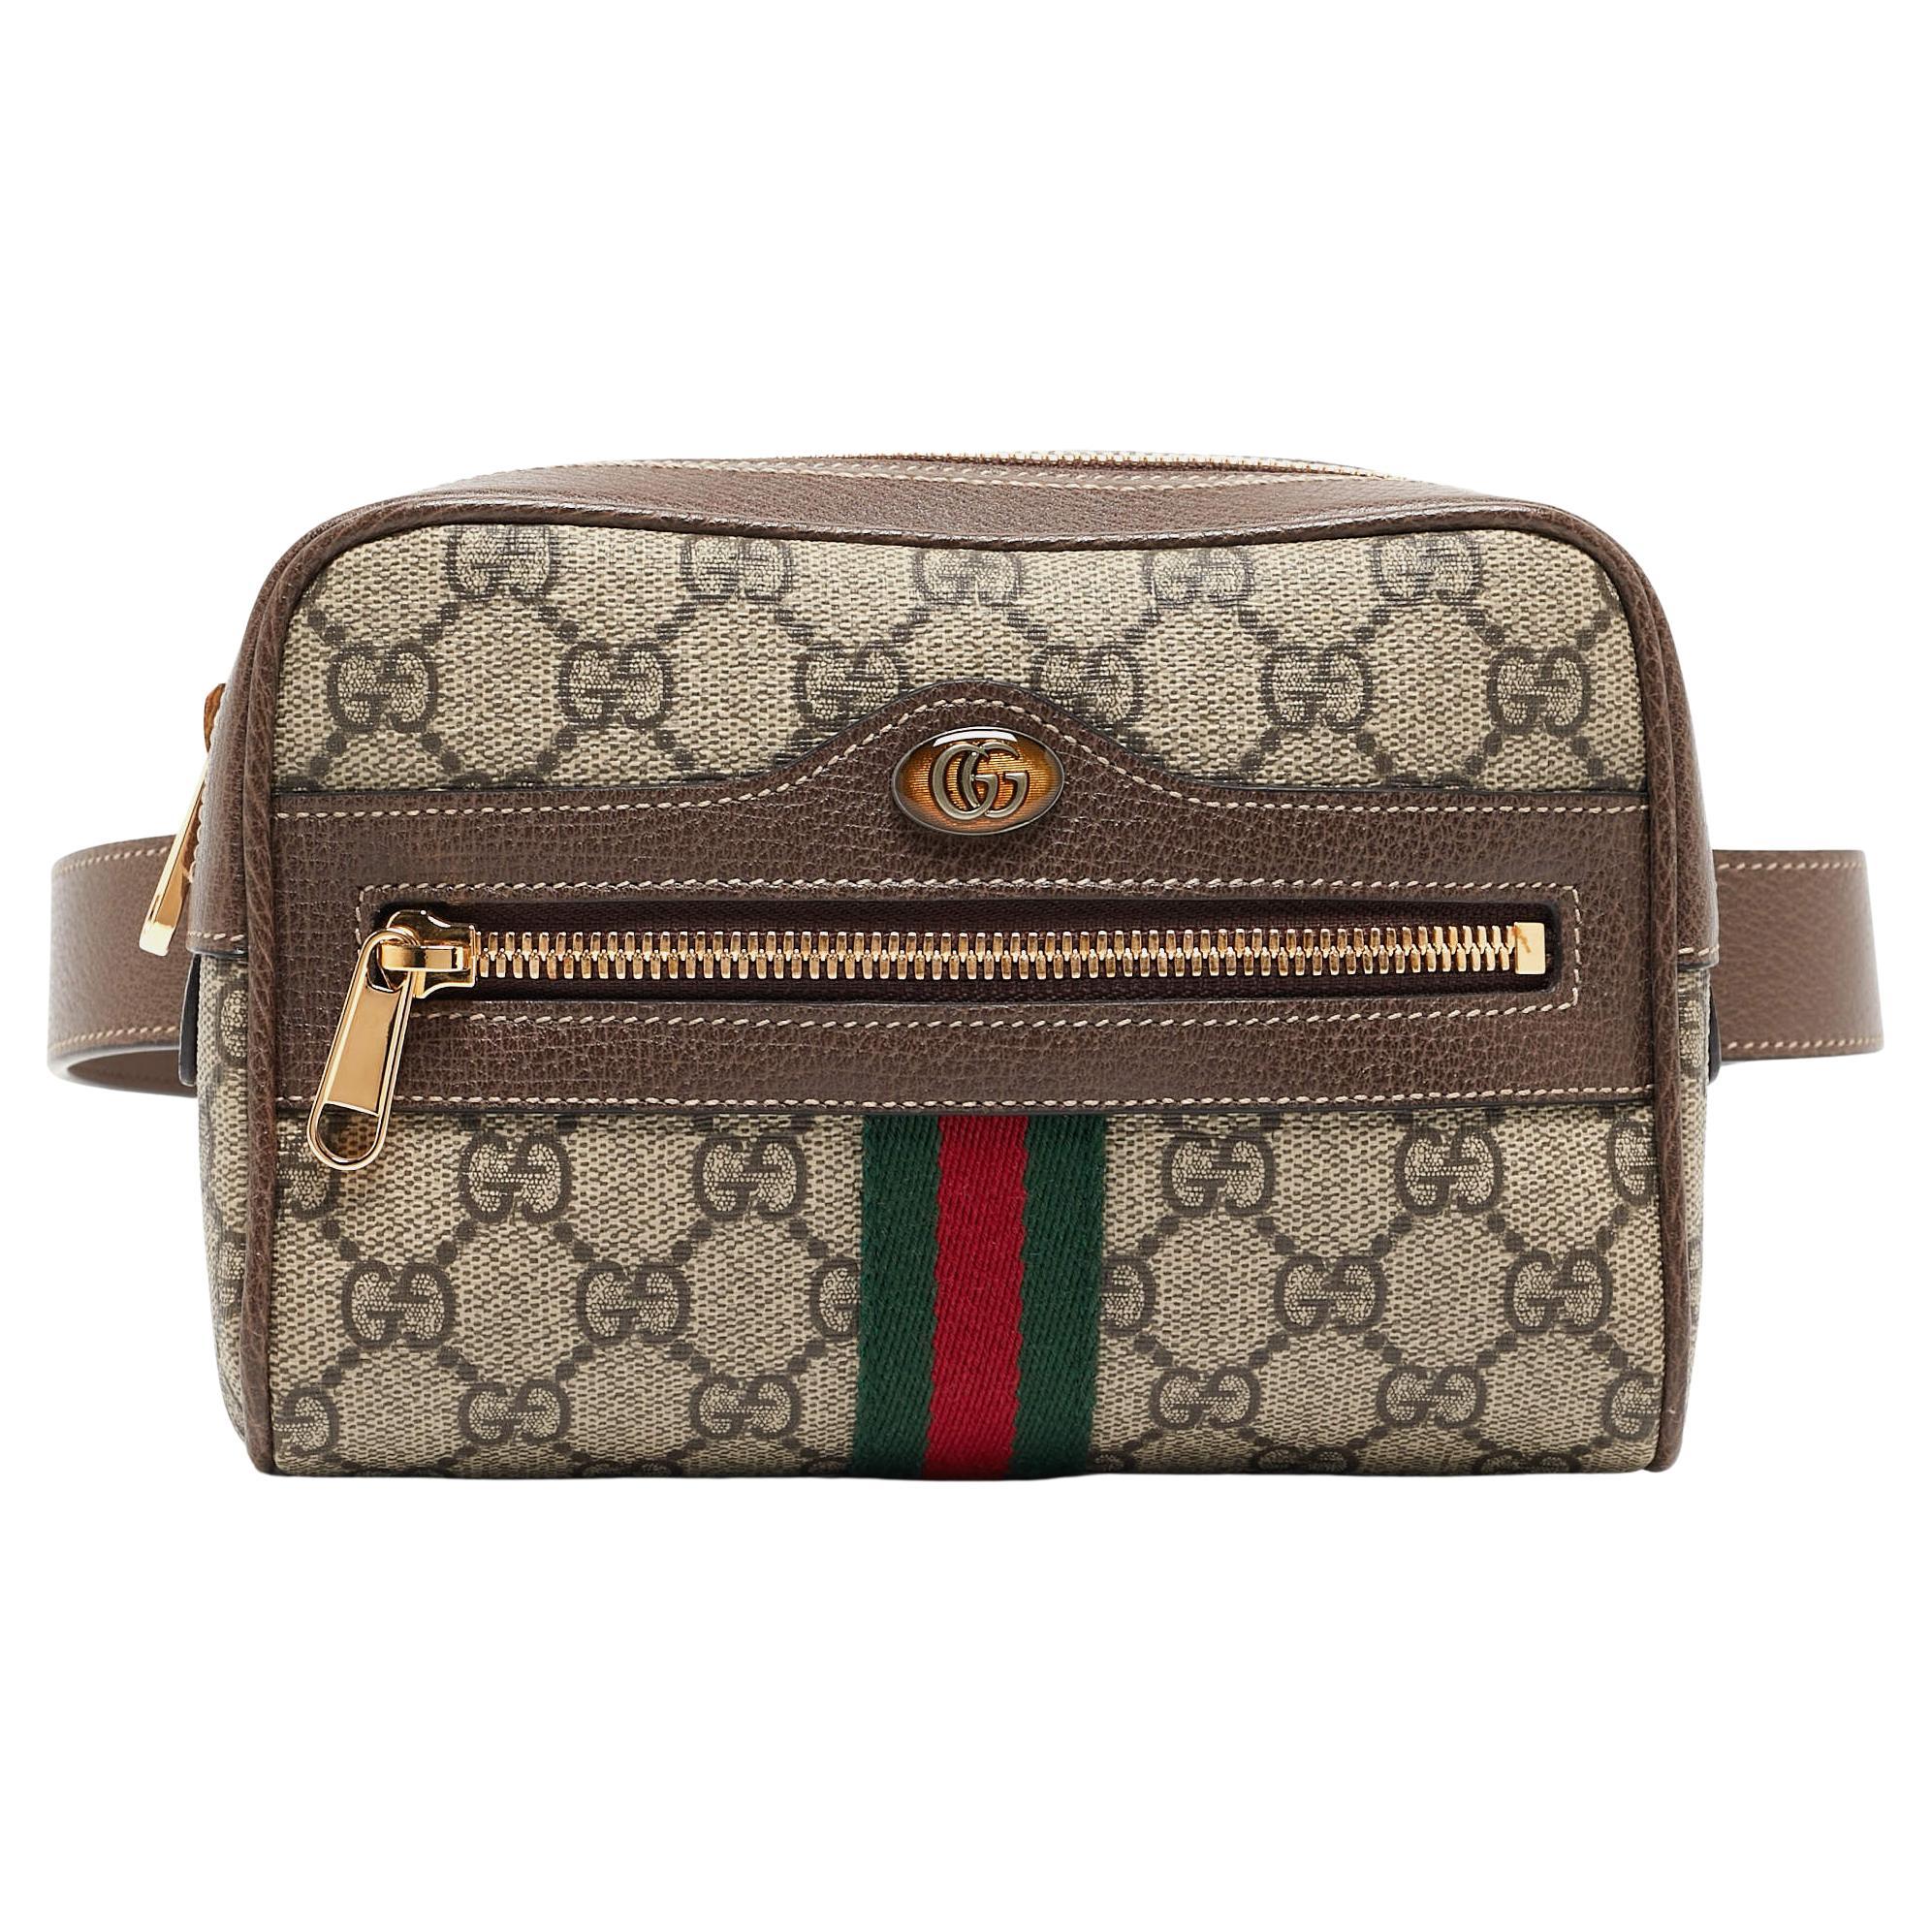 Gucci Brown/Beige GG Supreme Canvas and Leather Small Ophidia Belt Bag